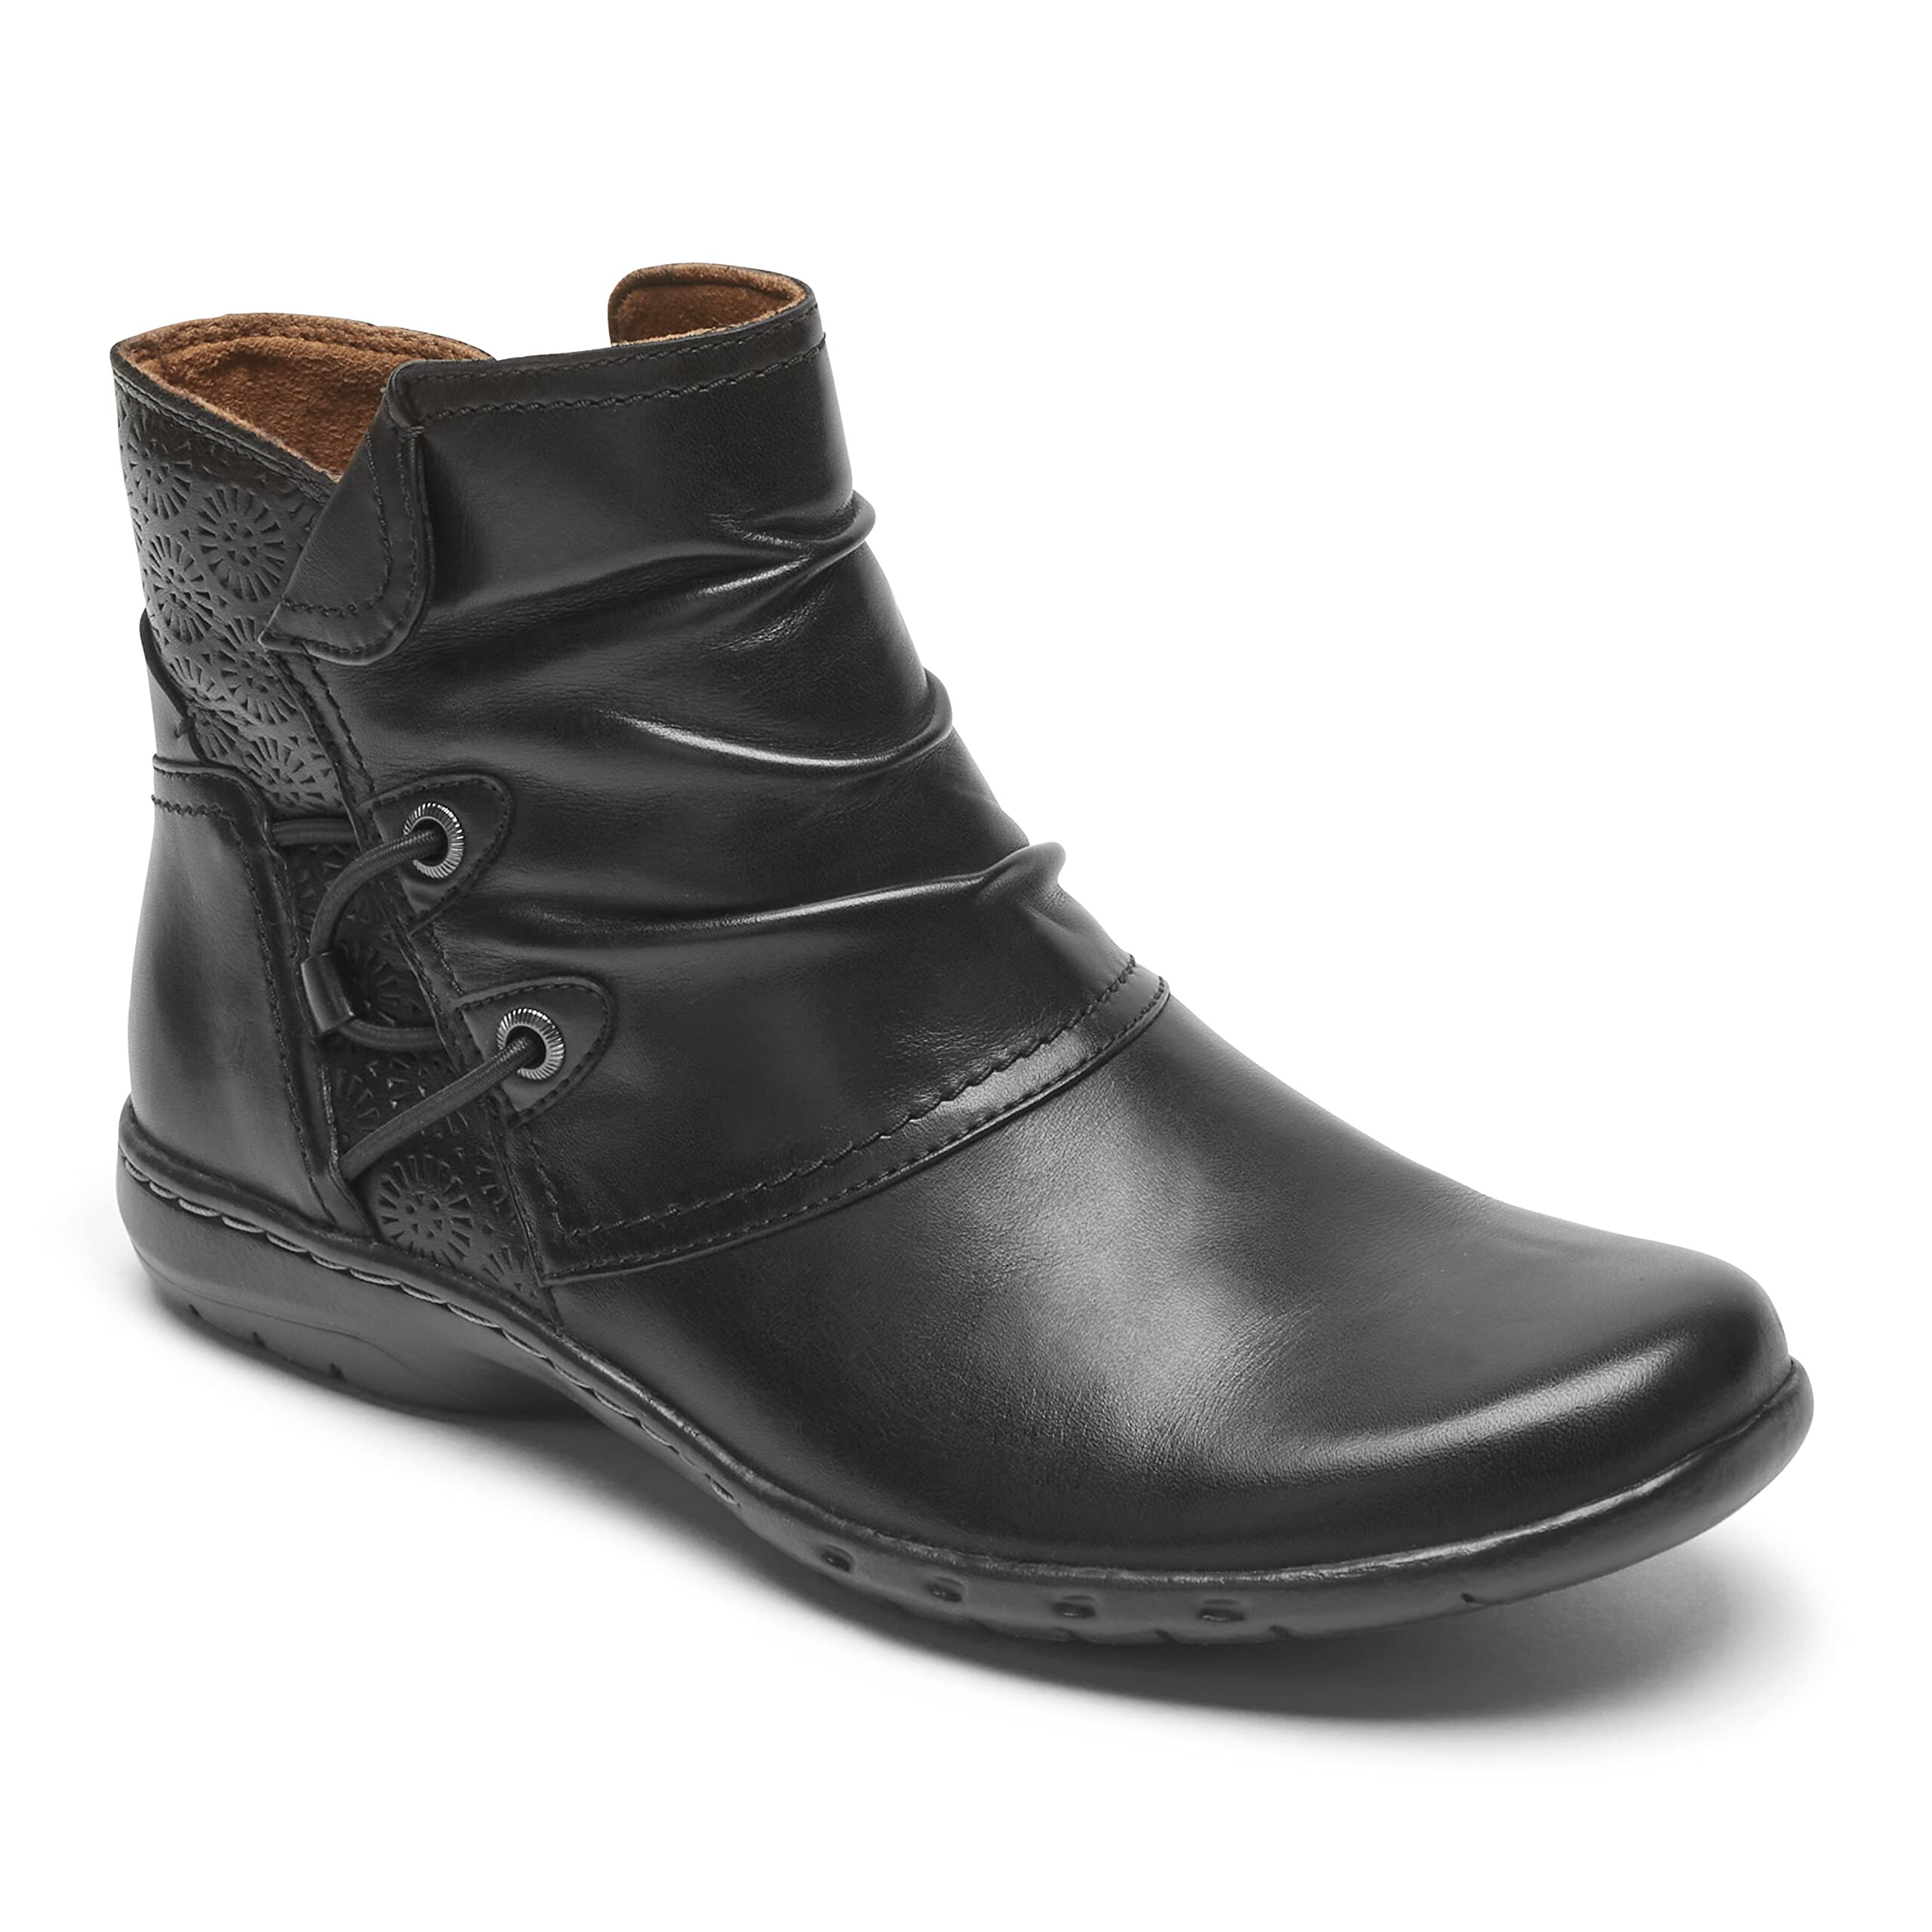 Incaltaminte Femei Cobb Hill Penfield Ruch Boot Black Leather